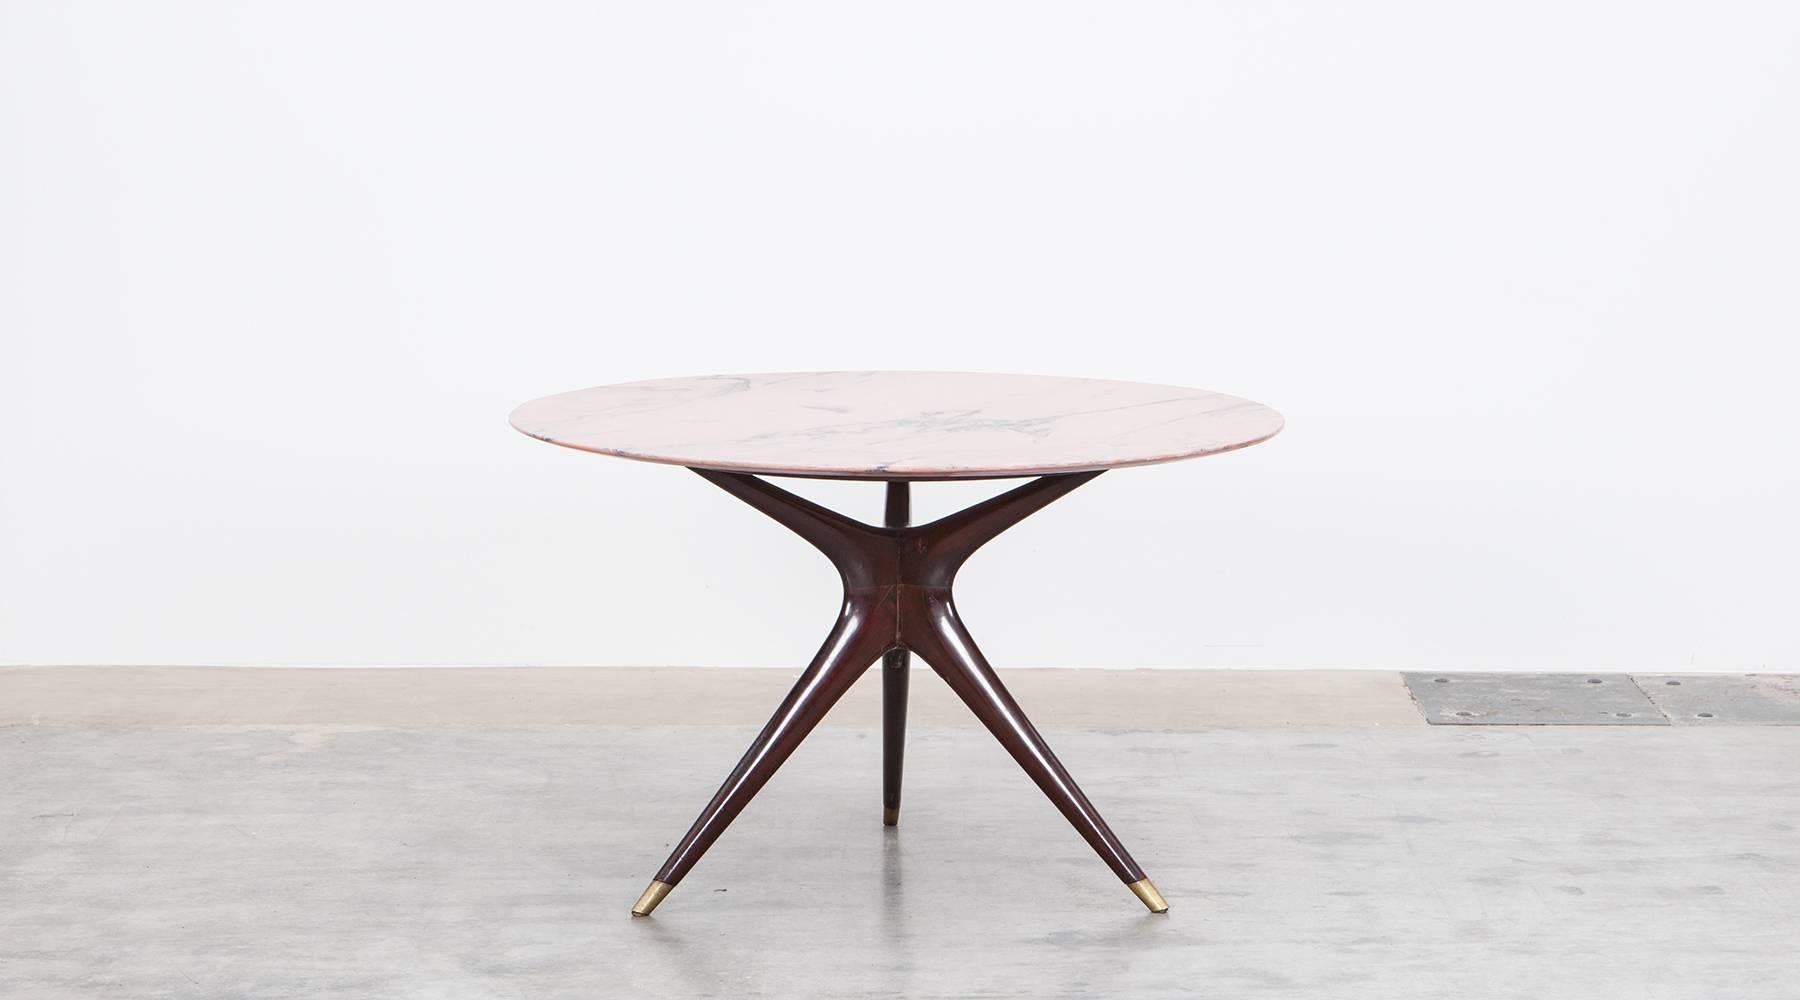 Beautifully worked table designed by Ico Parisi comes with round table top made of finest marble. The three legs are made of wood and finish on brass. Manufactured by Ariberto Colombo.

The creative multitasker was not only one of the most important